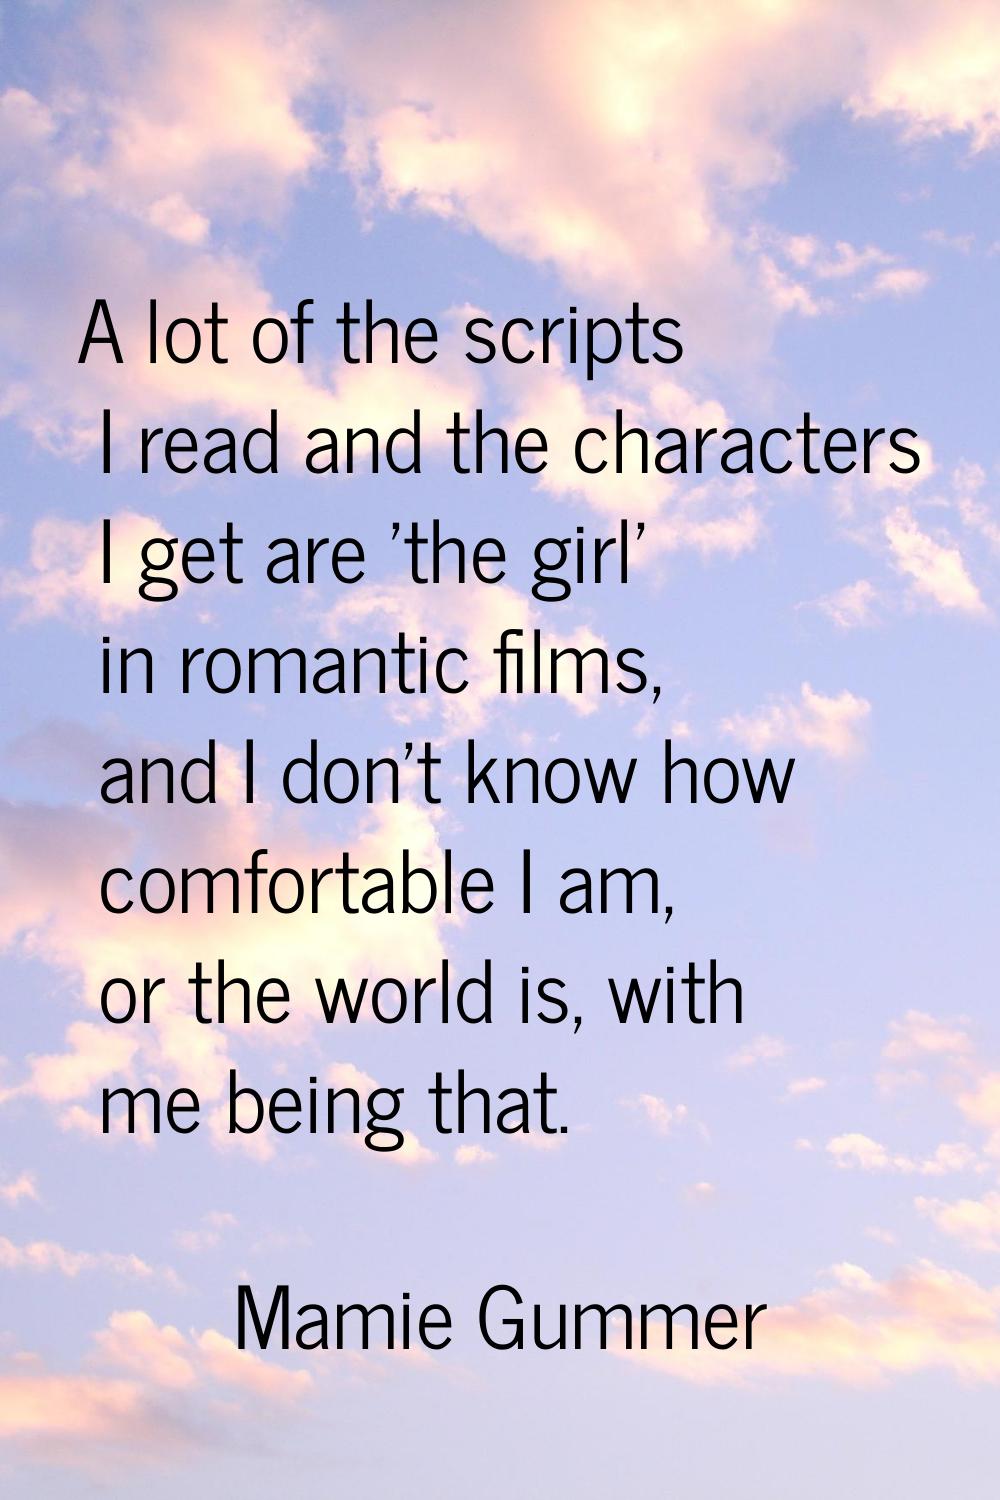 A lot of the scripts I read and the characters I get are 'the girl' in romantic films, and I don't 